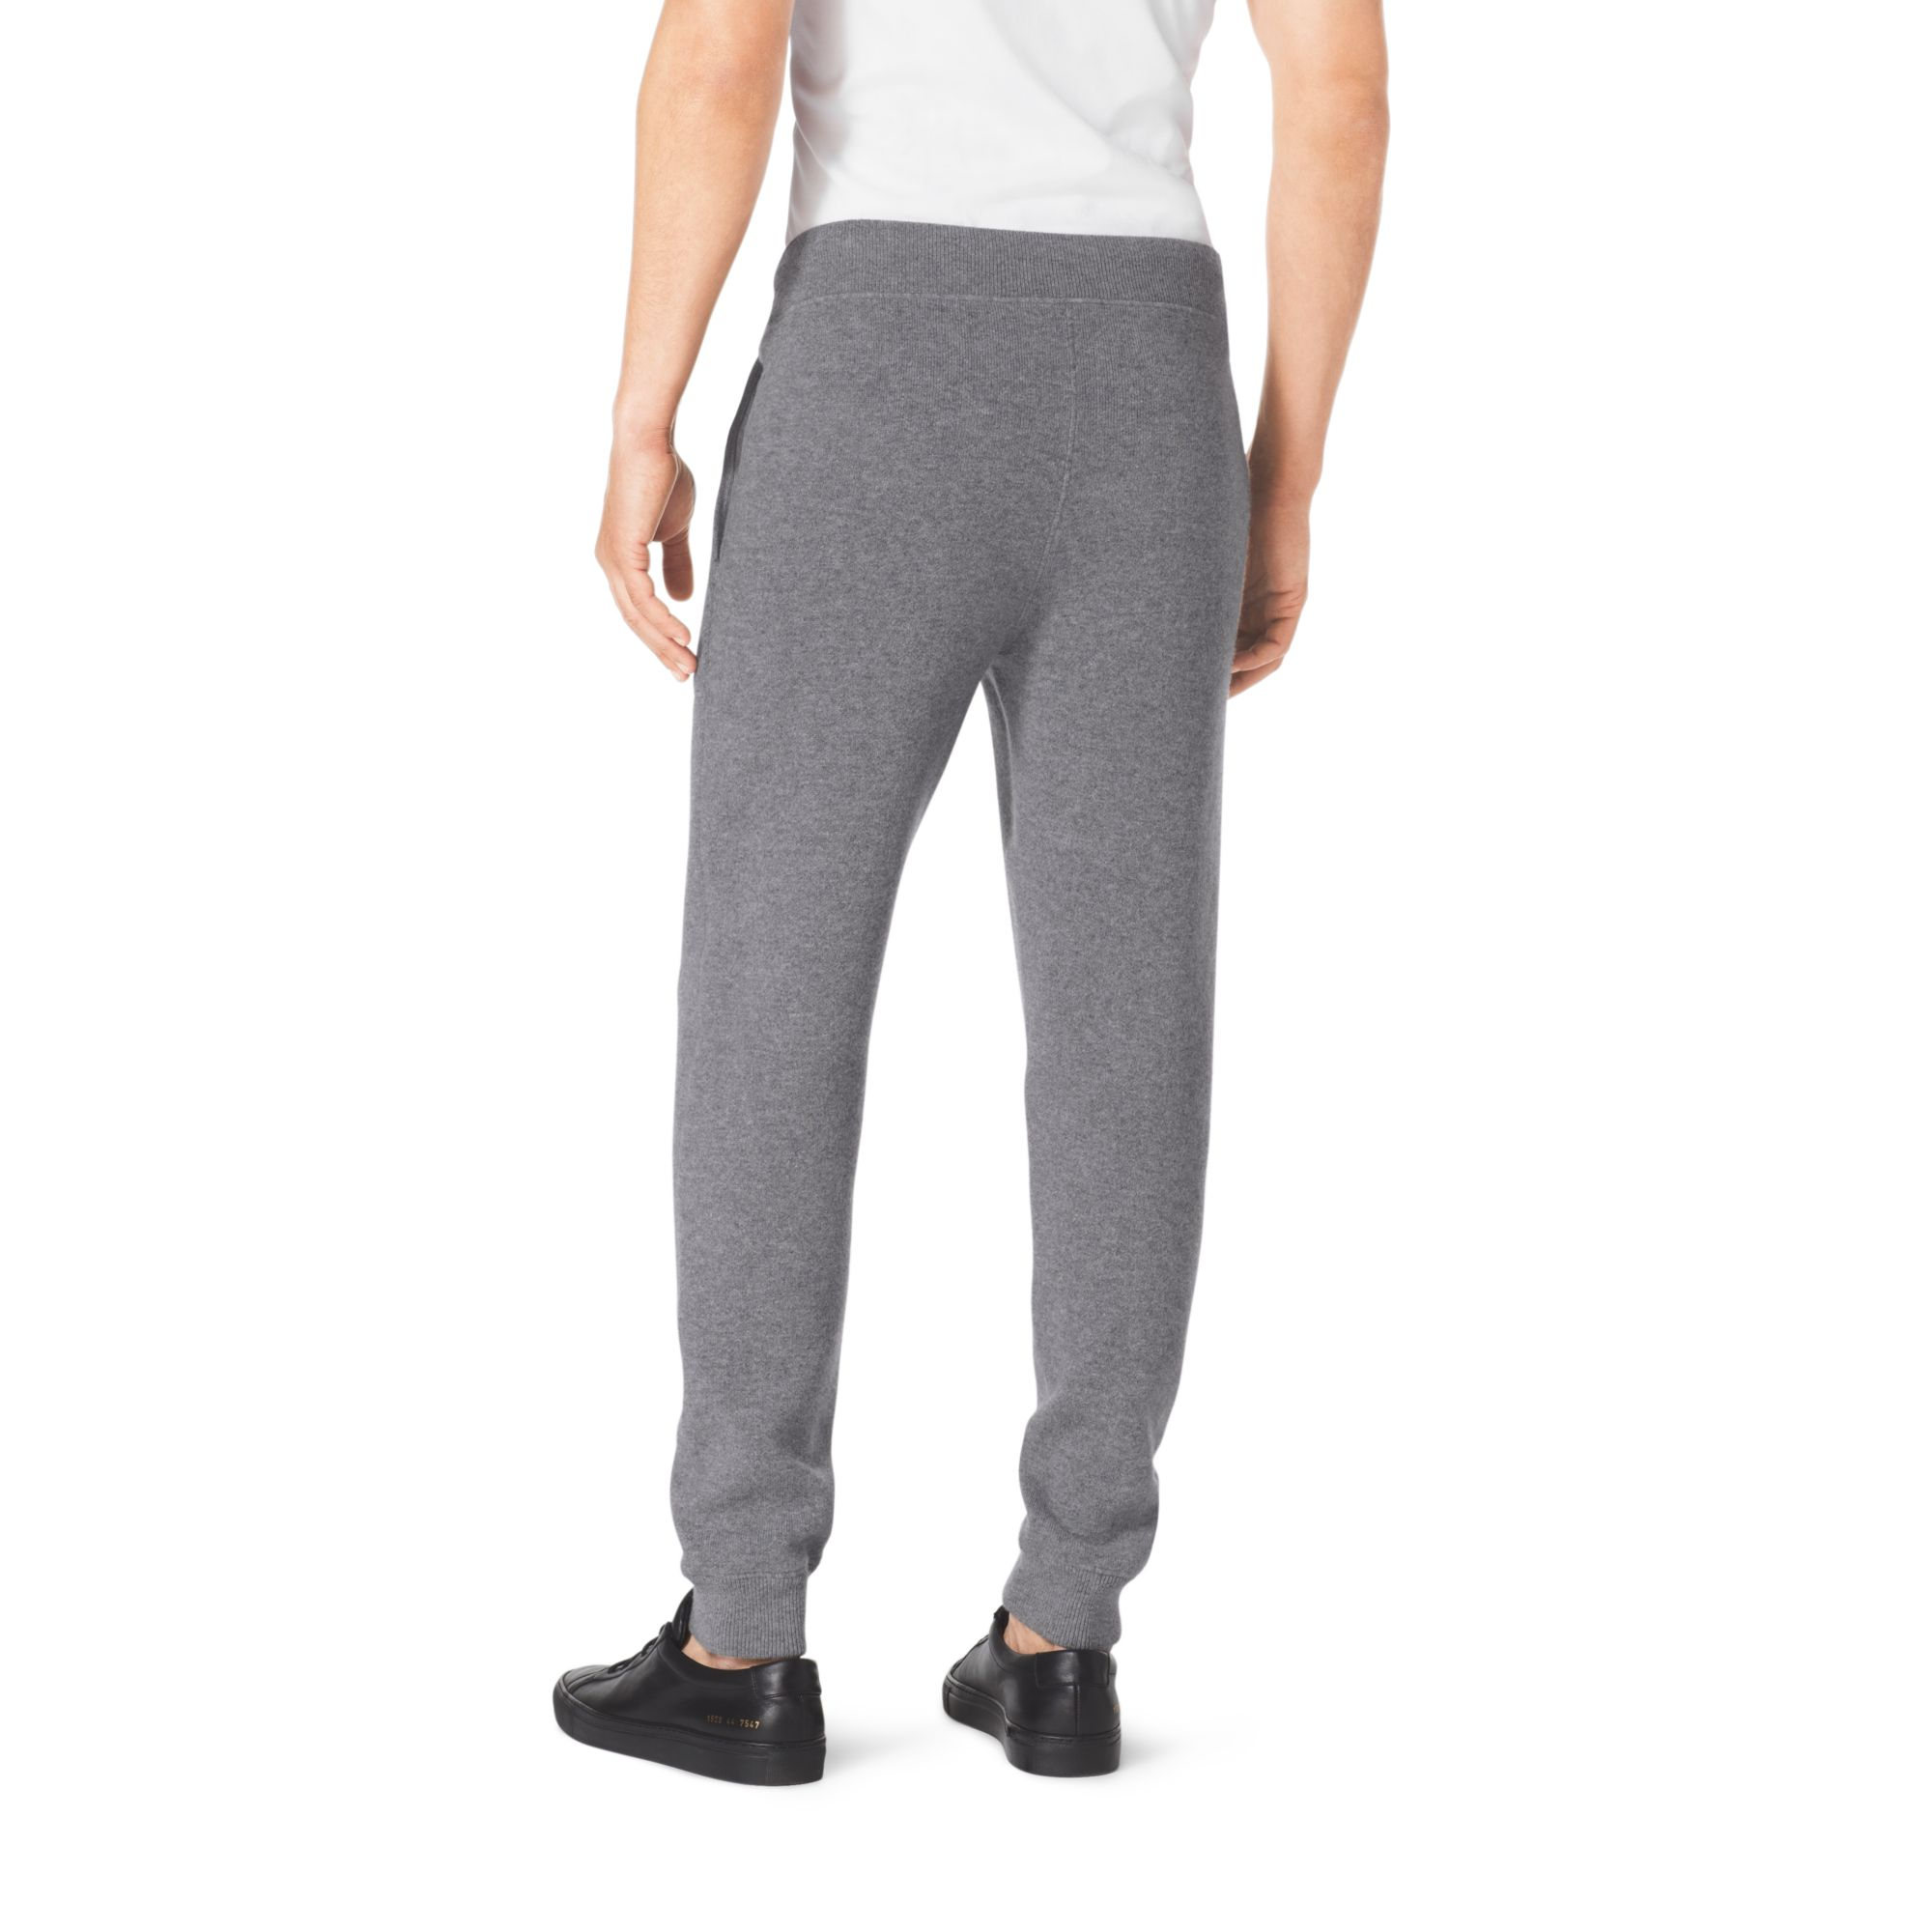 Lyst - Michael Kors Slim-fit Cashmere-faced Sweatpants in Gray for Men